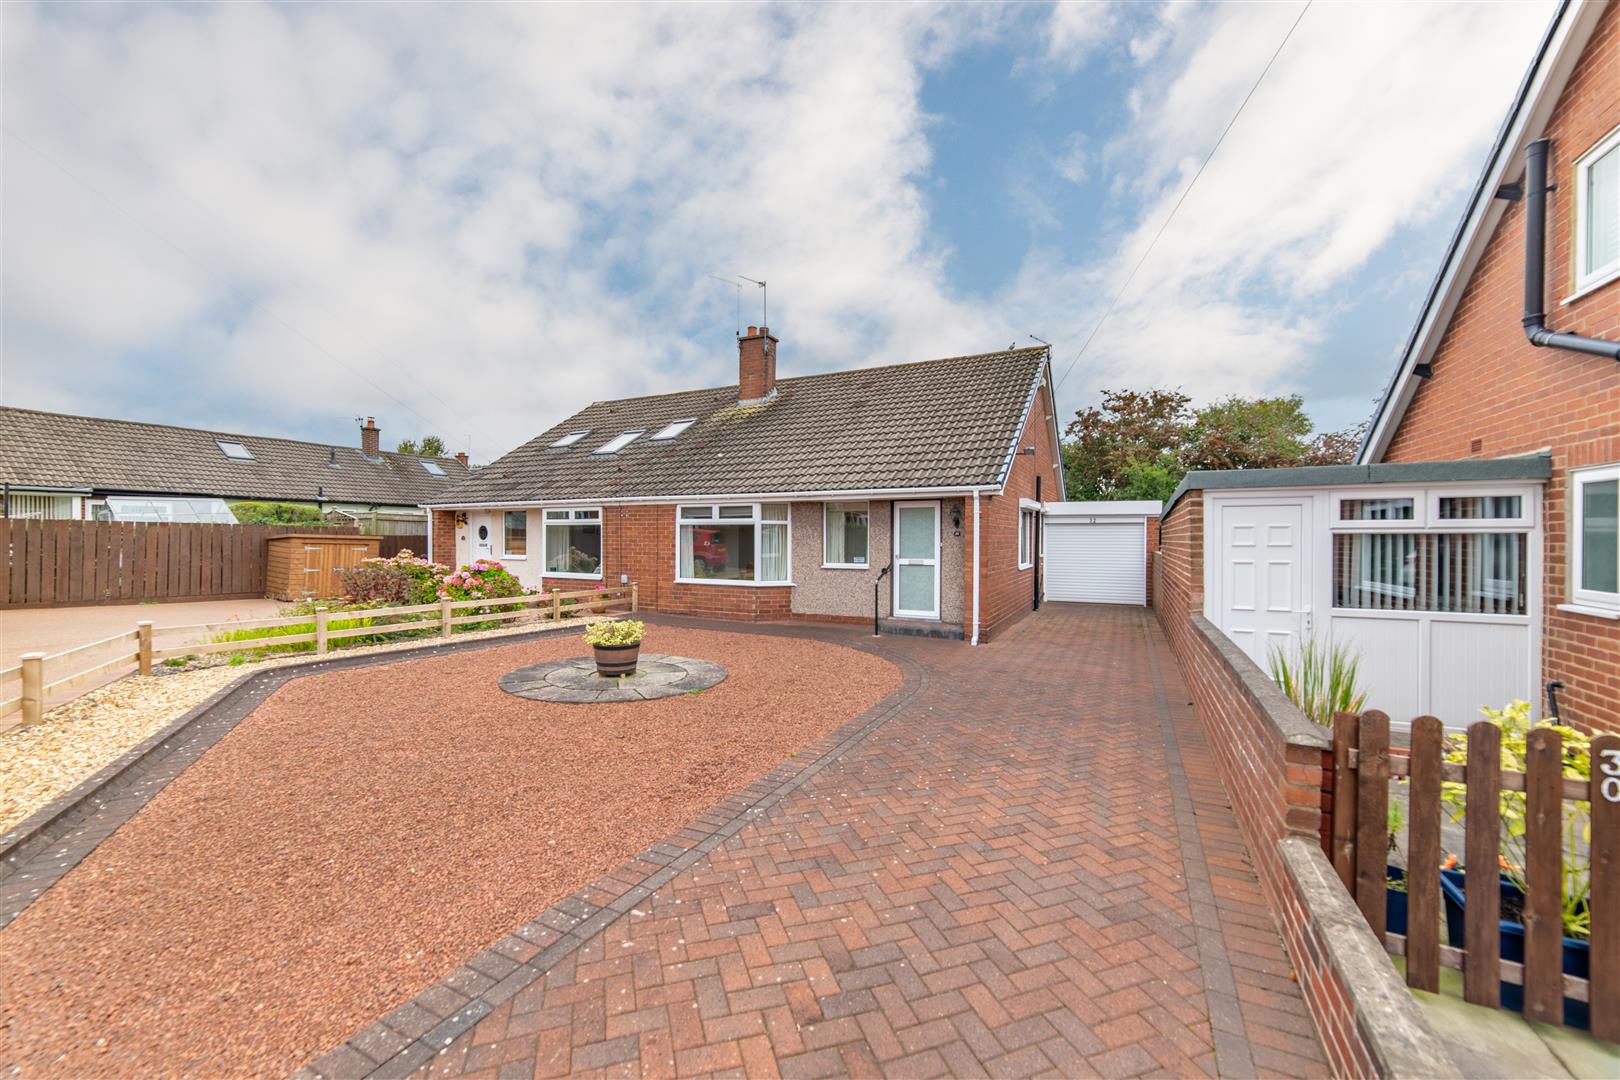 2 bed semi-detached bungalow for sale in Rothbury Avenue, Gosforth - Property Image 1